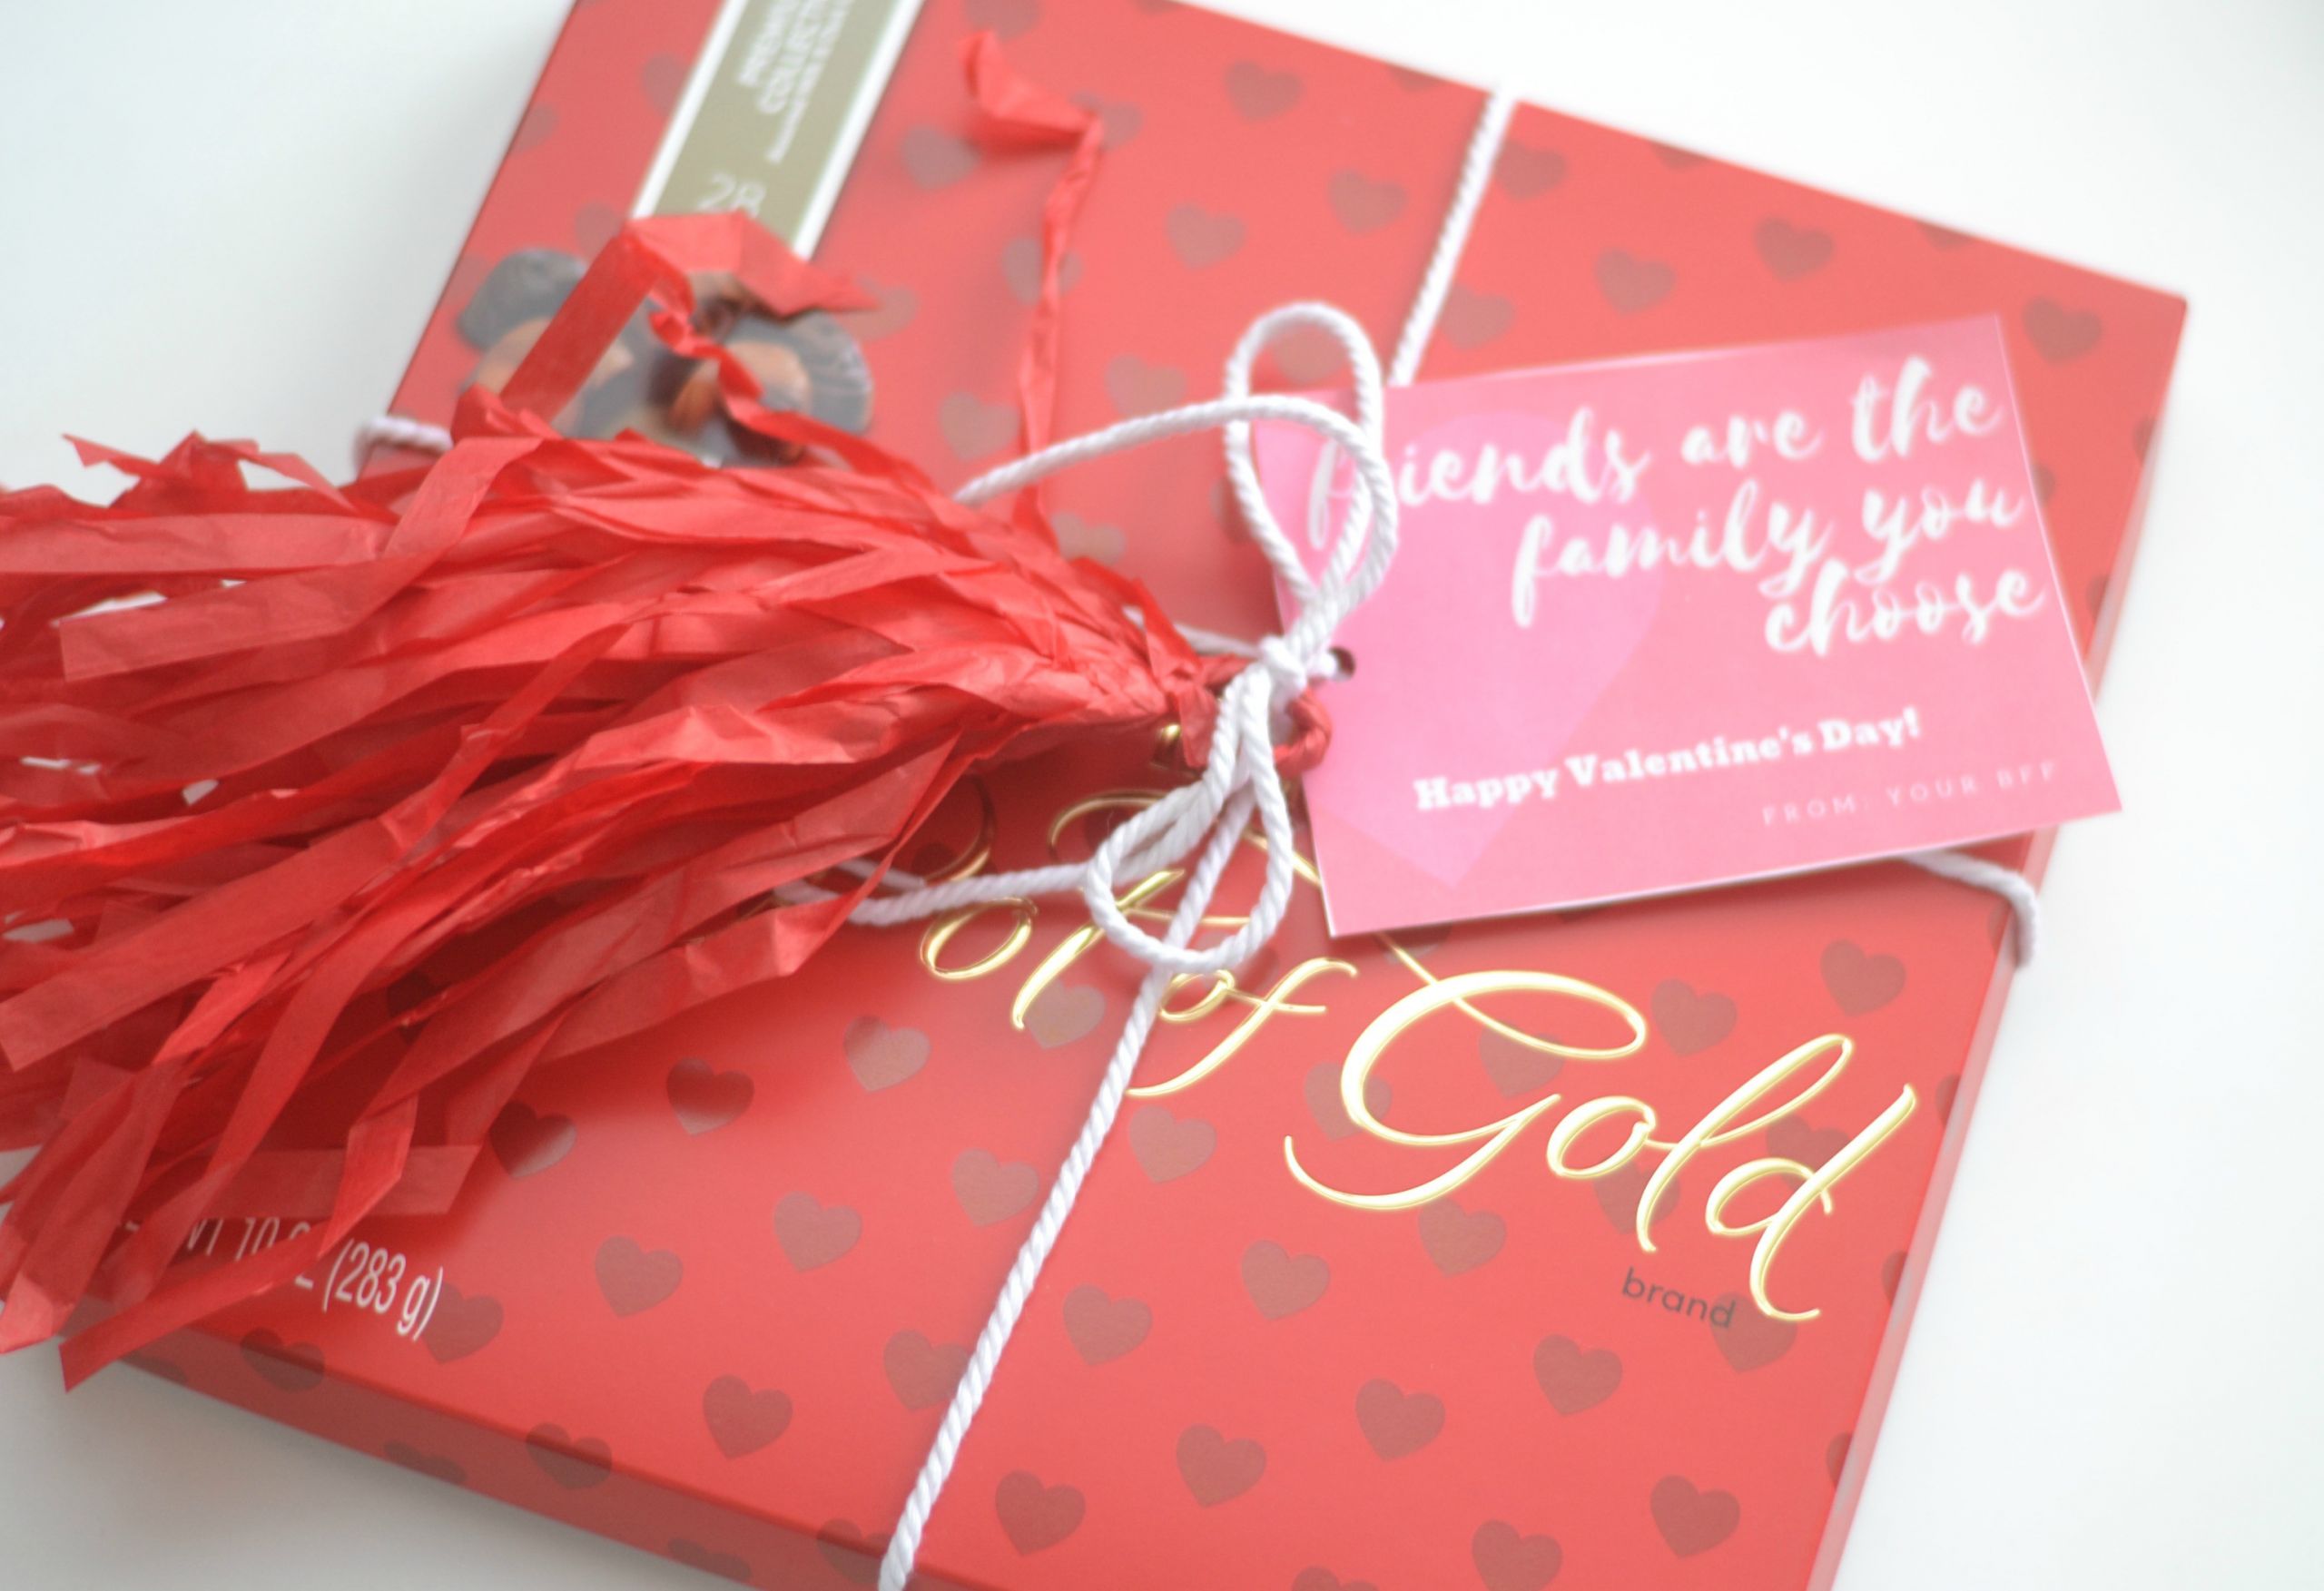 Valentines Day Gifts For Friends
 The Perfect Valentine s Day Gift For Your BFF